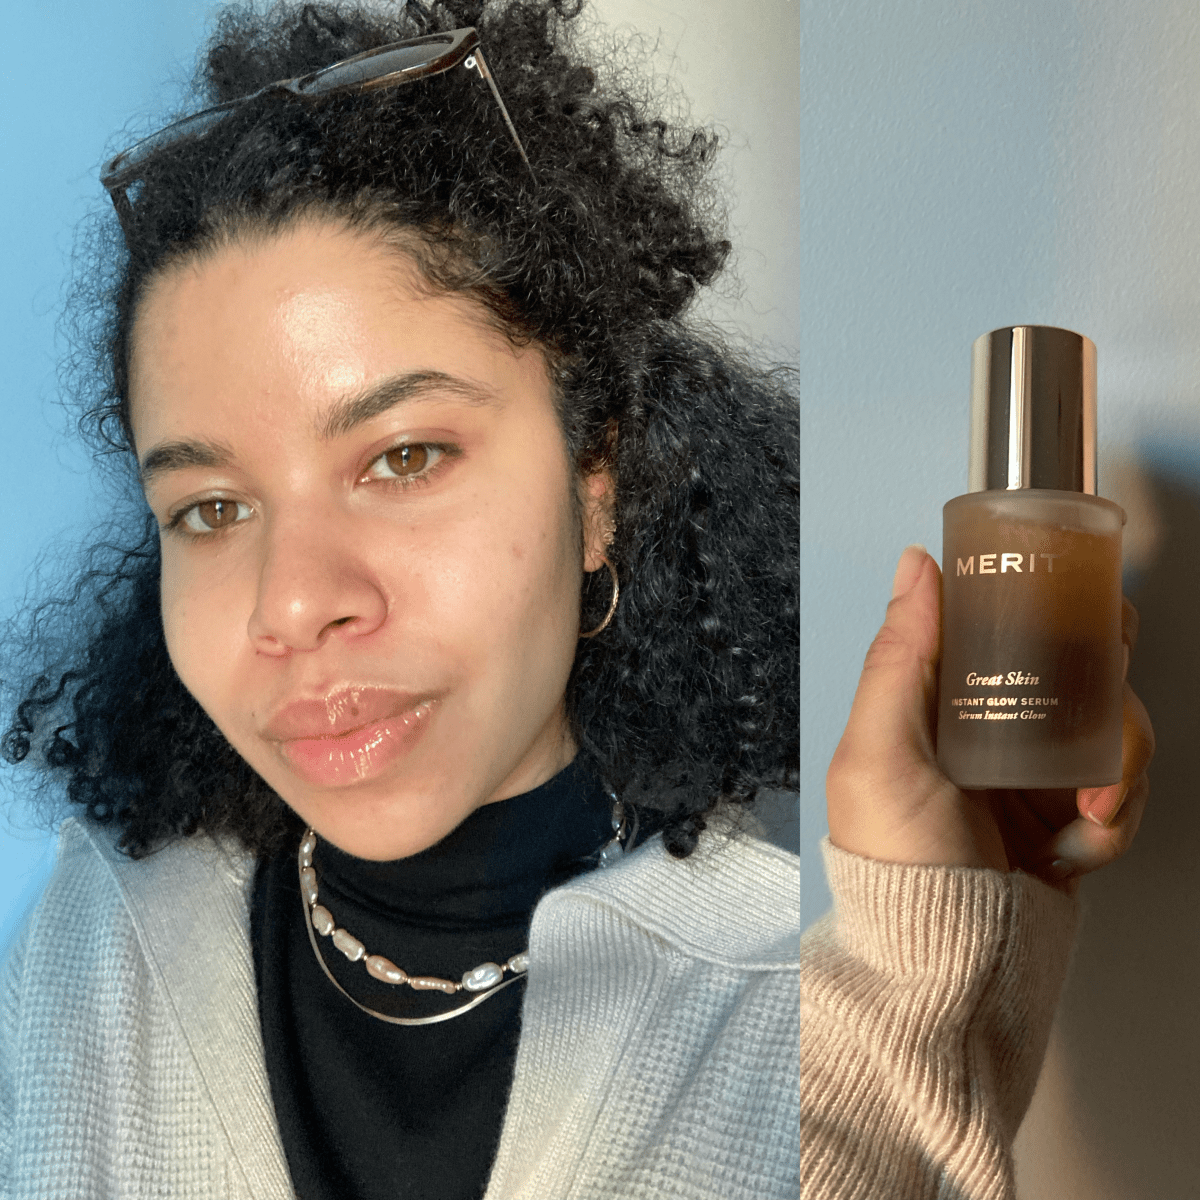 The Serum That Made My Skin Look So Good, Even My Barista Noticed